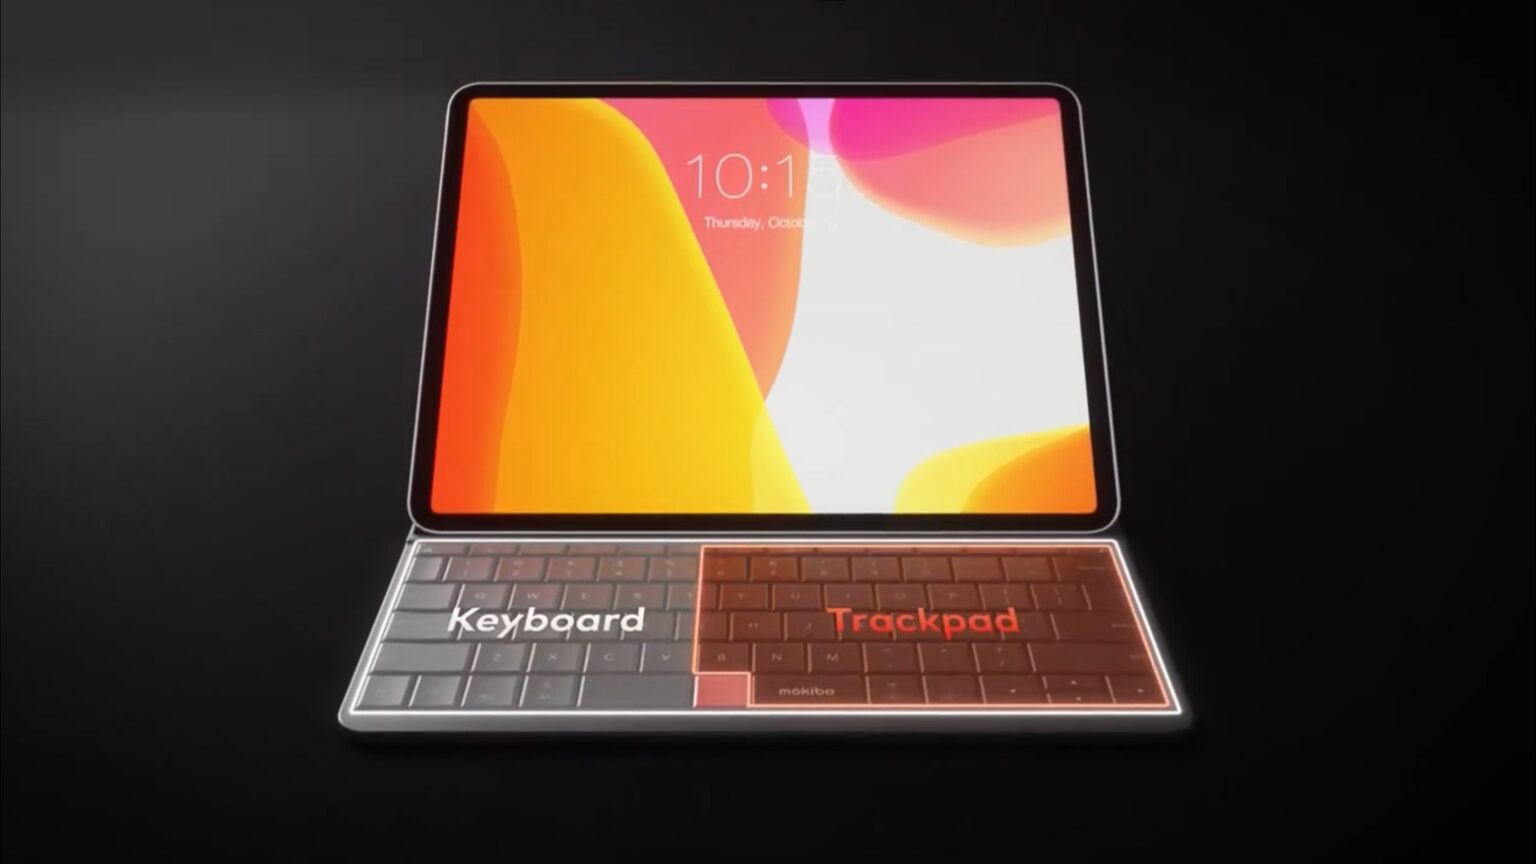 With Mokibo, the keyboard is the trackpad.